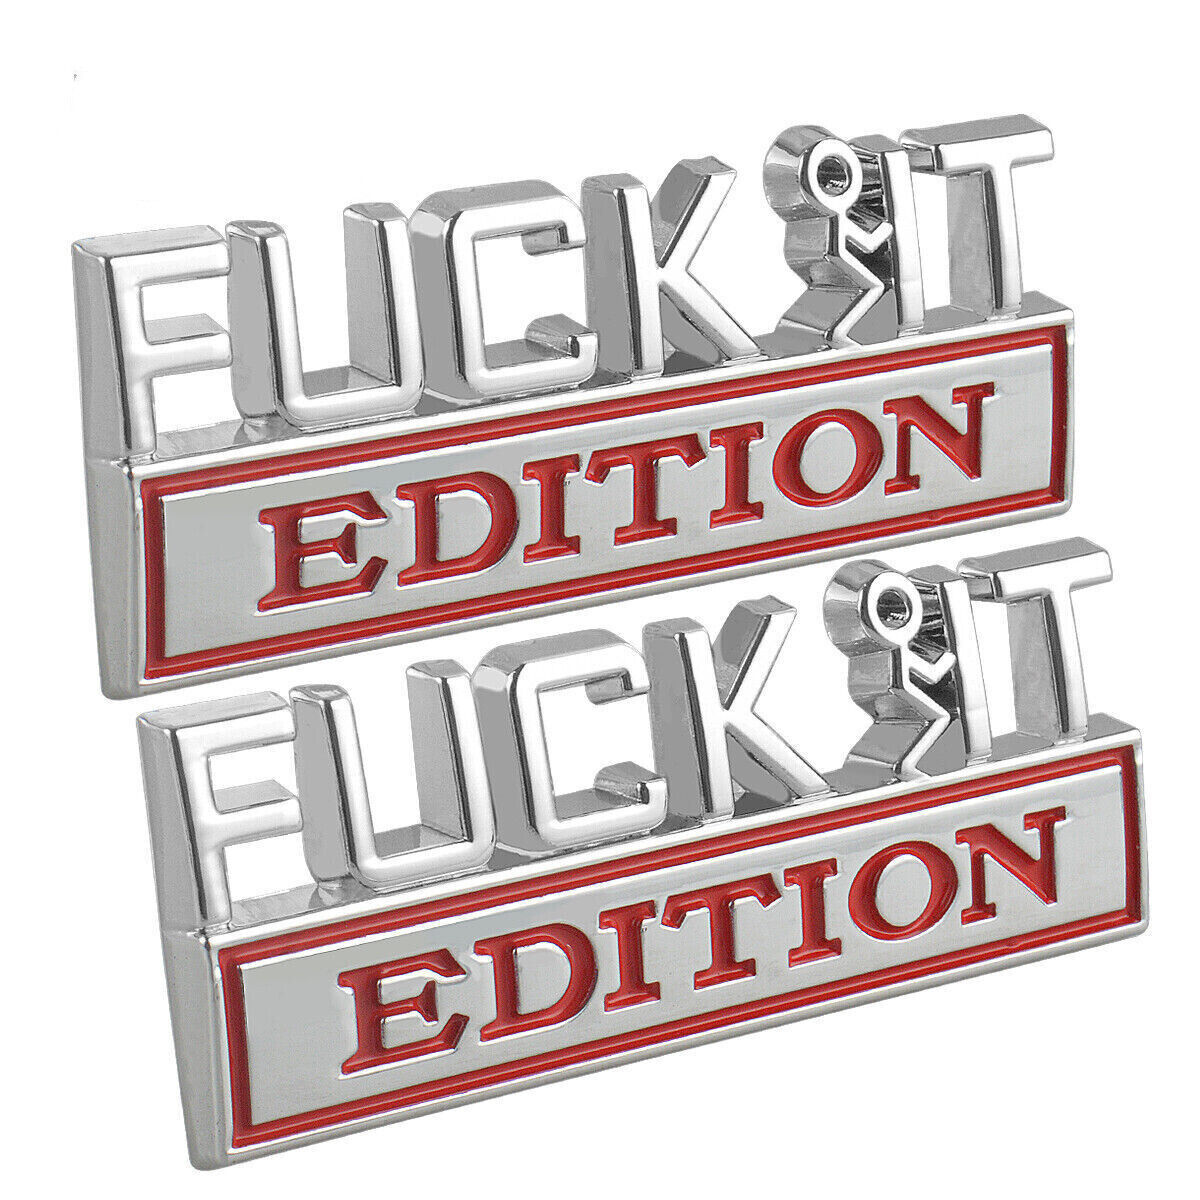 2X F*CK IT EDITION 3D Emblem Badges Sticker Decal for Chevy Car Truck Universal